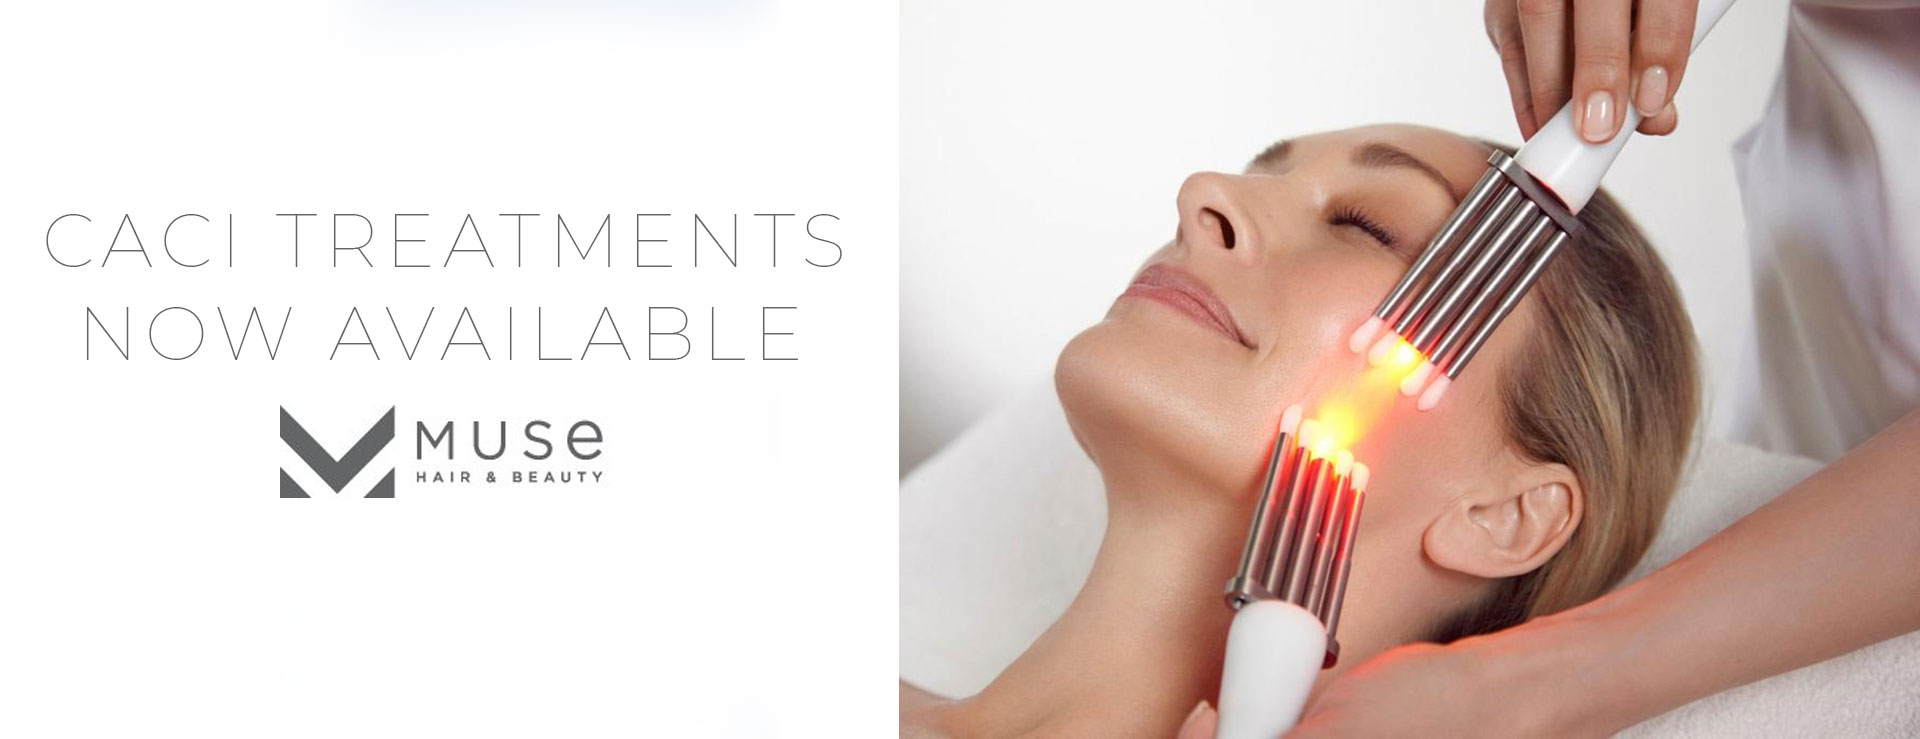 CACI At Muse Hair & Beauty Salon In Broadway